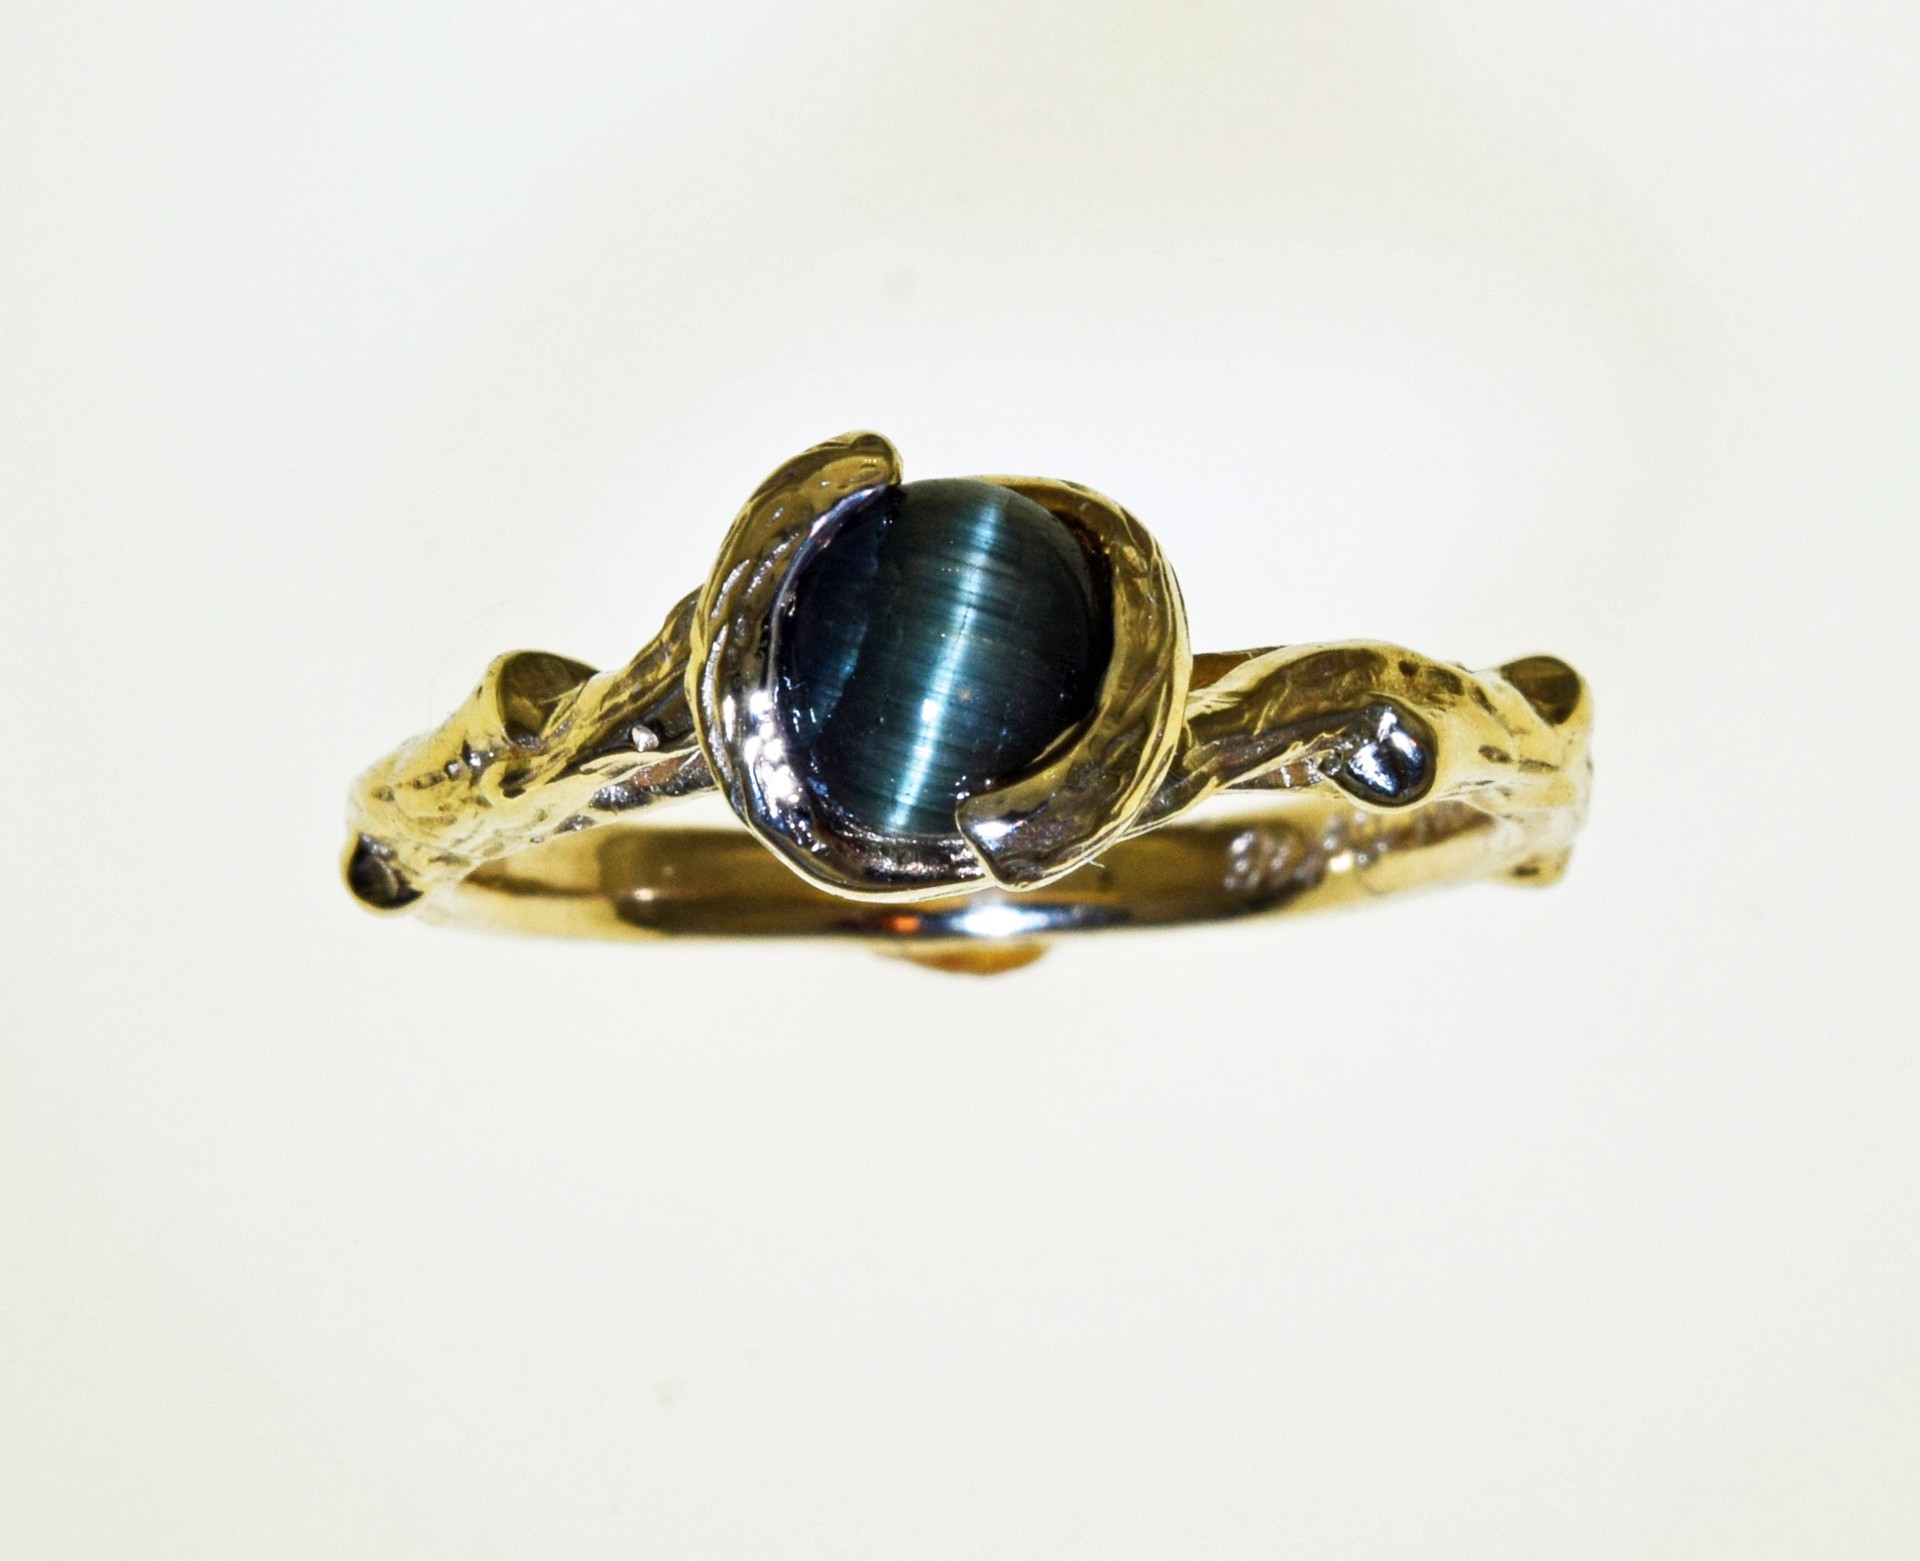 Branches Ring with Cat's Eye Chrysoberyl by Thomas Tietze